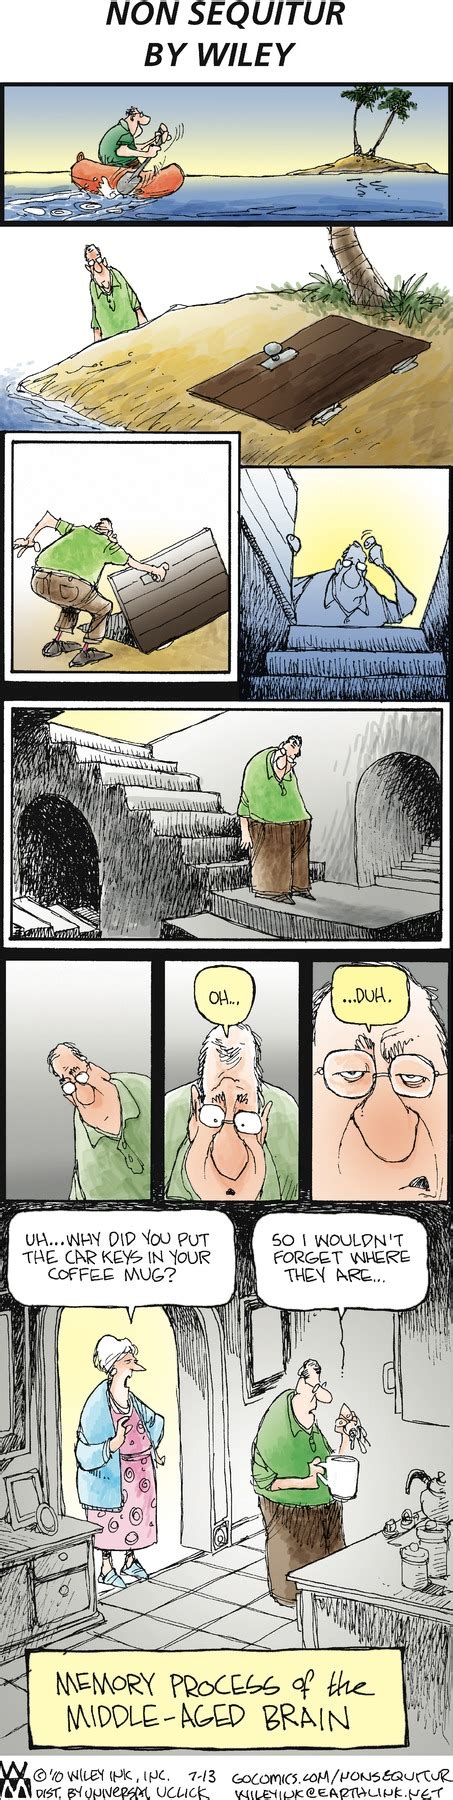 Jun 22, 2022 · View the comic strip for Non Sequitur by cartoonist Wiley Miller created June 22, 2022 available on GoComics.com. June 22, 2022. GoComics.com - Search Form Search. . 